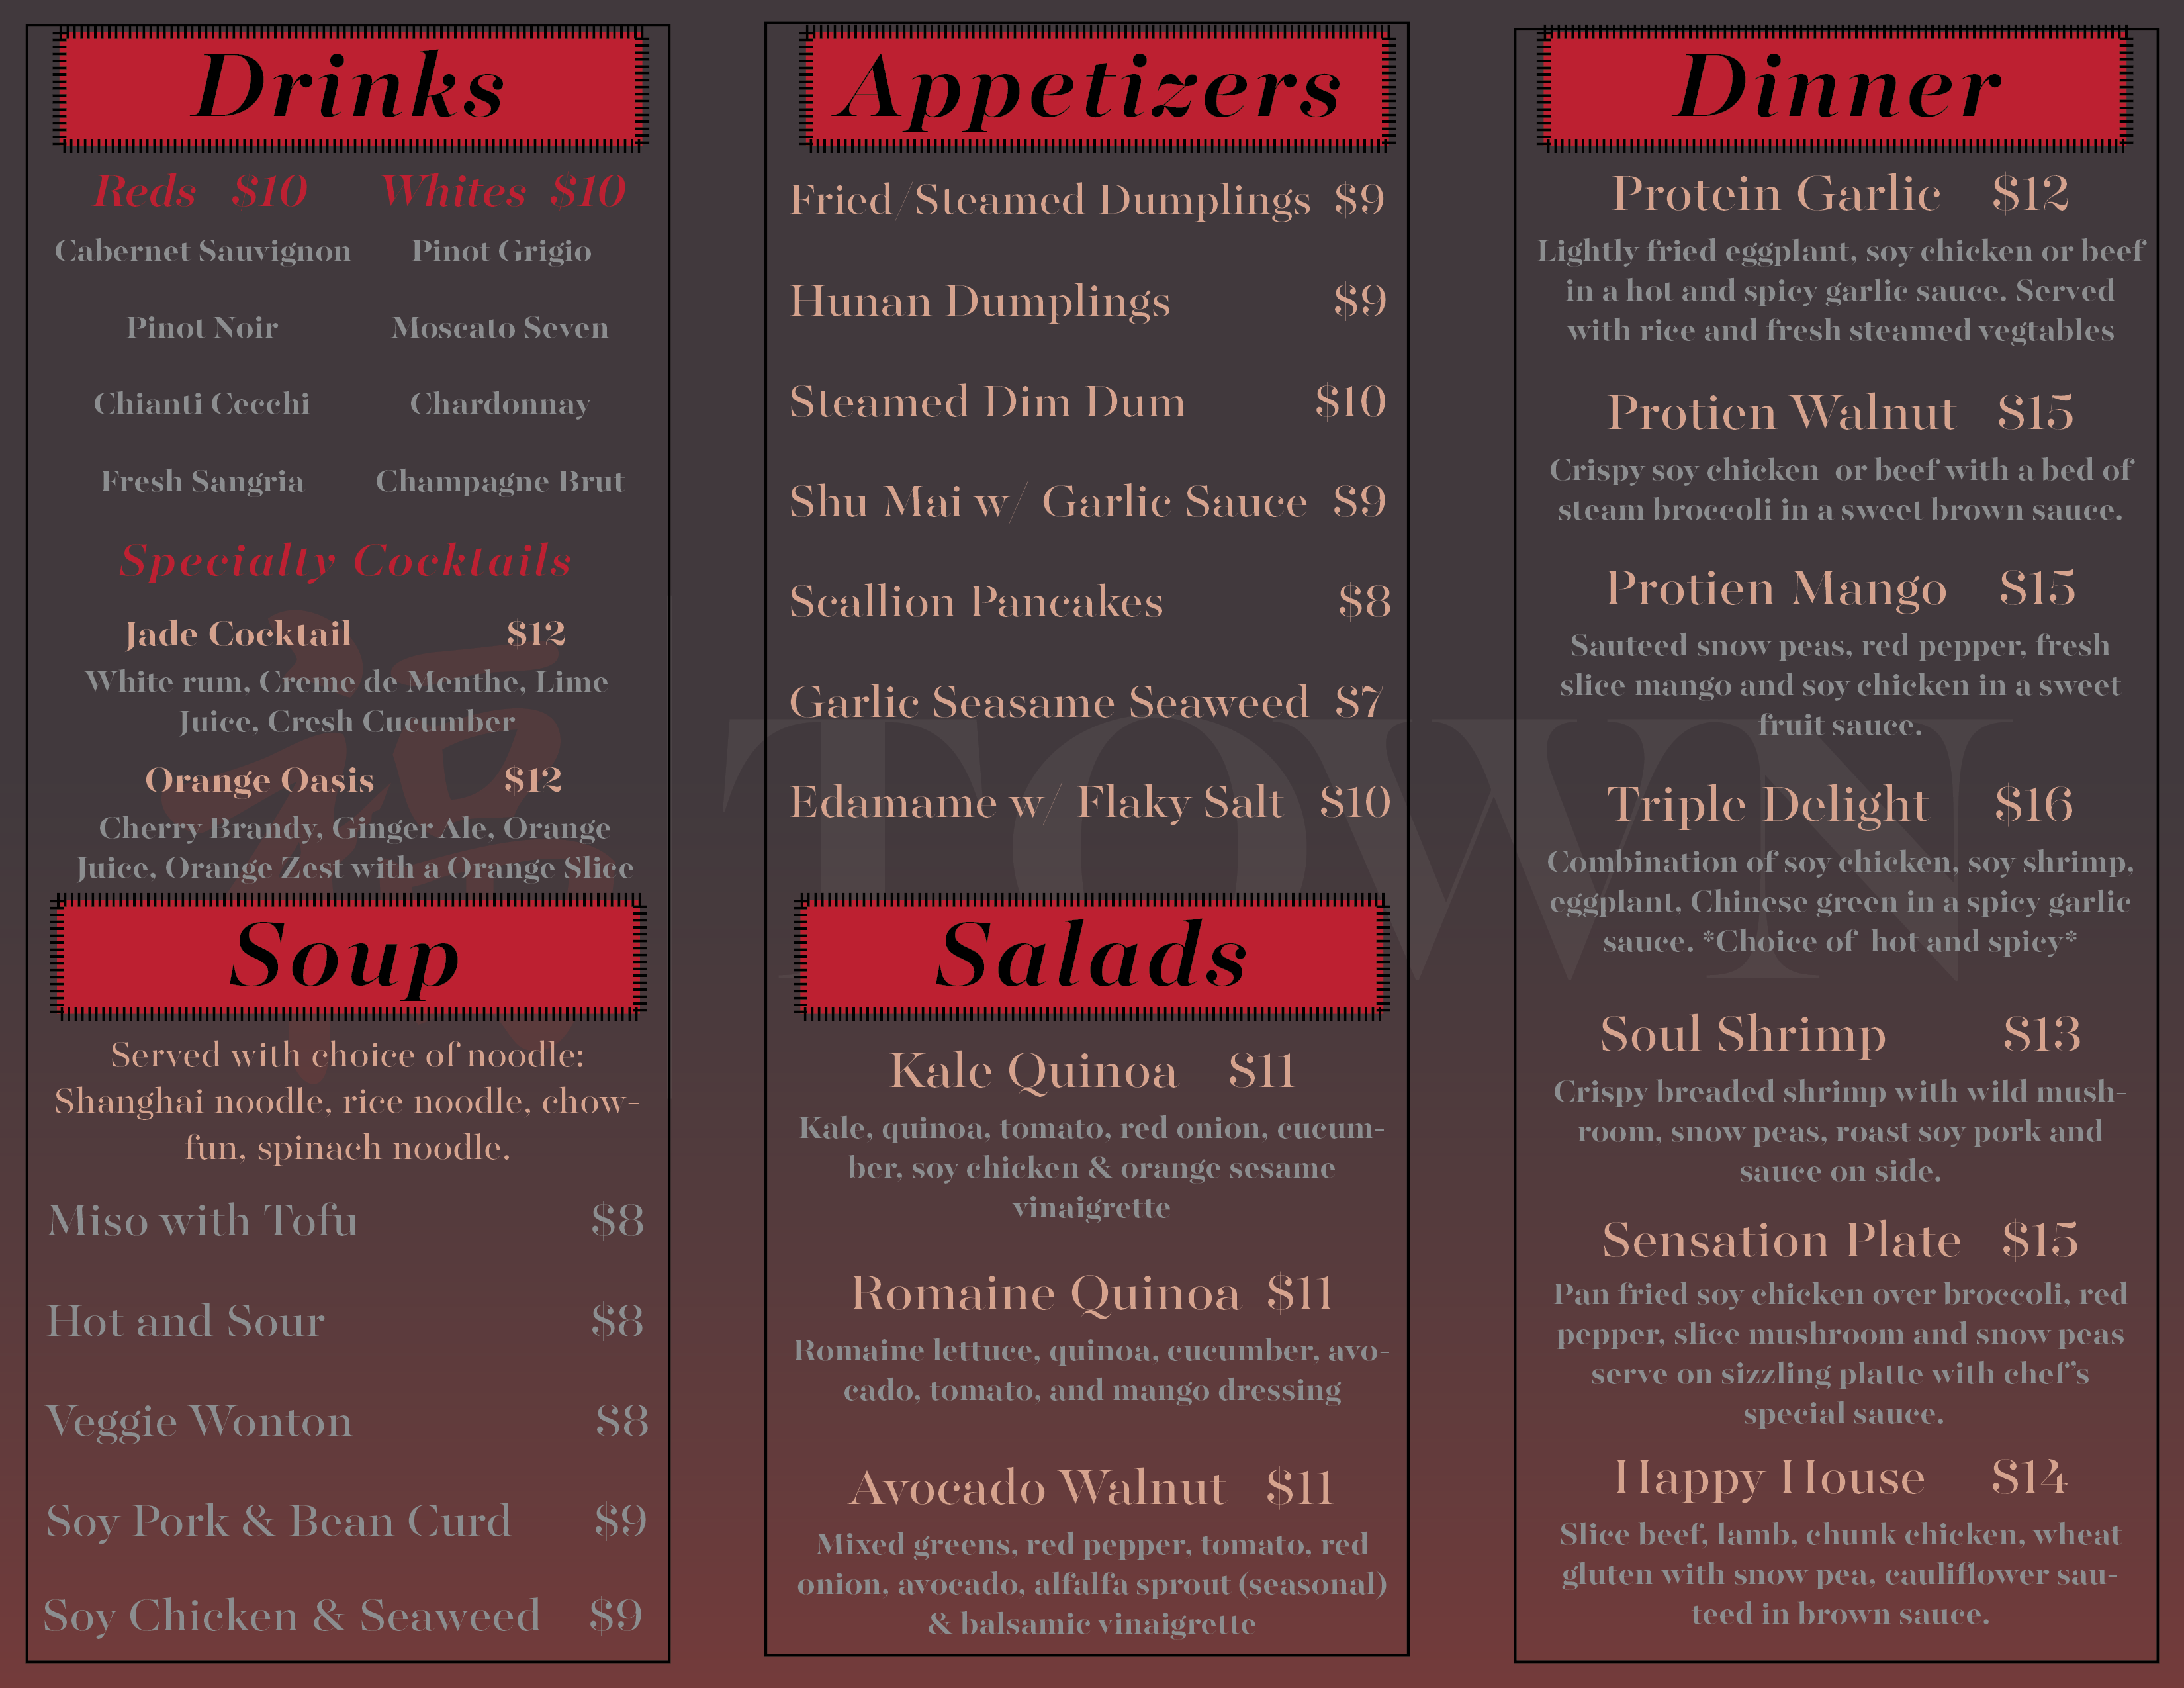 Menu photo with items and prices